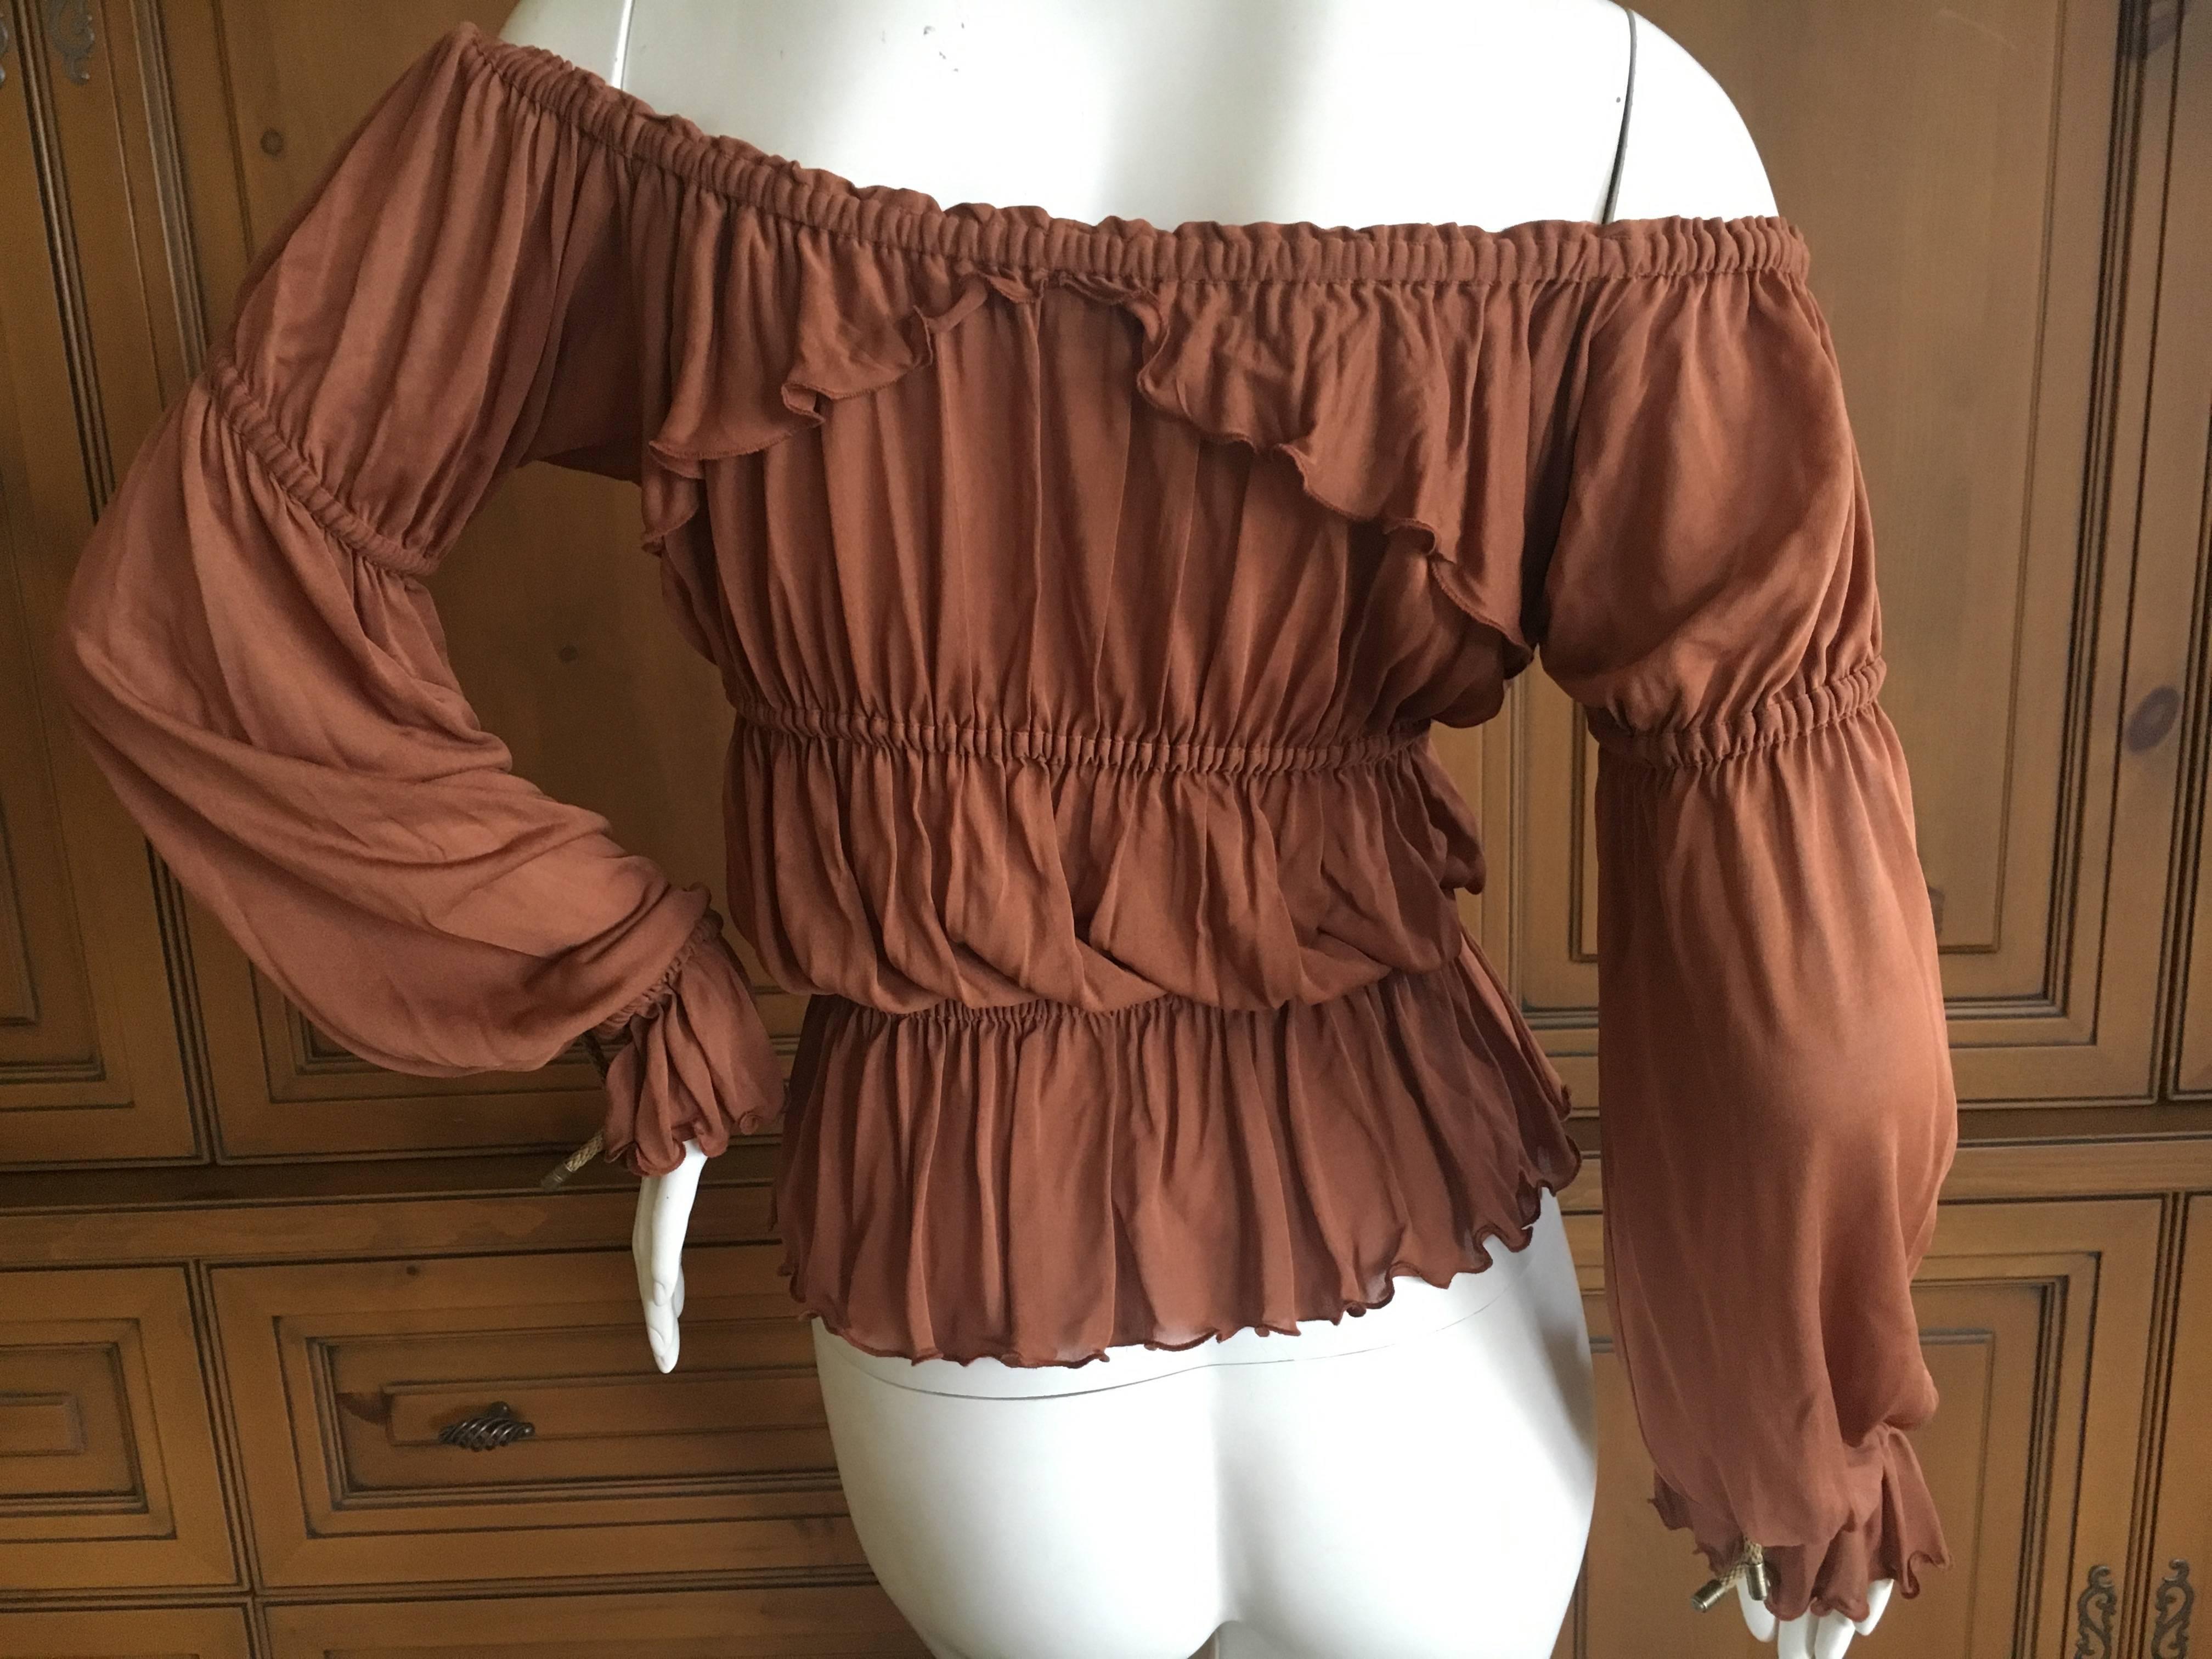 Yves Saint Laurent by Tom Ford Off the Shoulder Peasant Blouse
Peasant sleeves with gathered layers, this is semi sheer, so beautiful.
There is a lot of stretch, there is elastic
 Measurements are given un stretched
 Size L
Bust 36